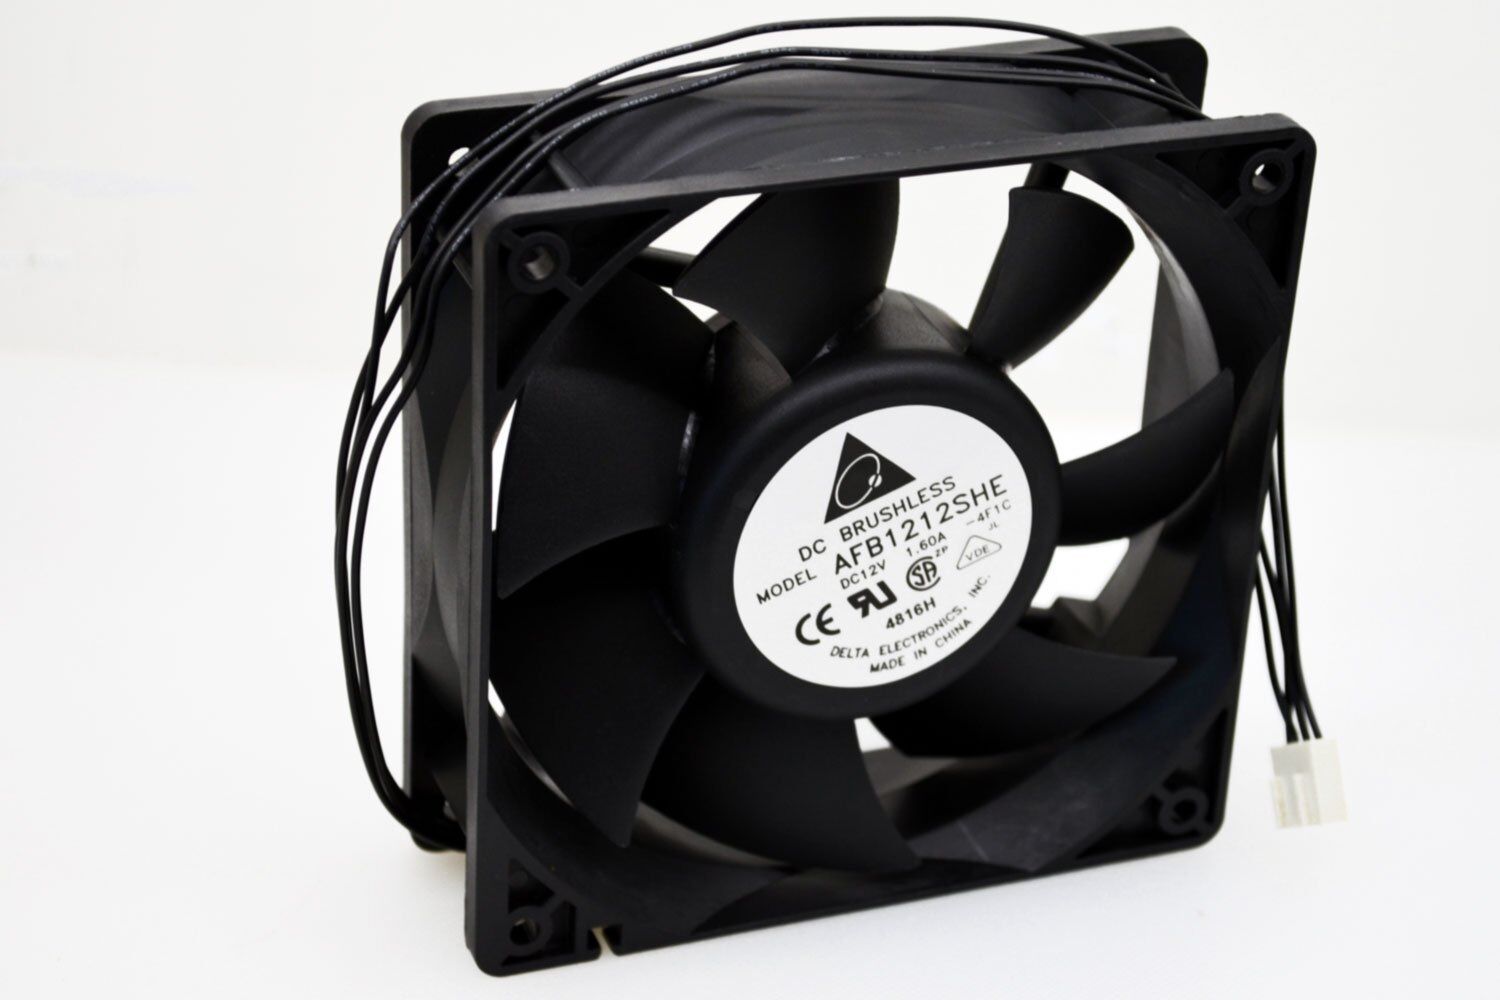 Delta AFB1212SHE 120mm x 38mm 4-Pin PWM Fan Server Case Water Cooling 151 CFM